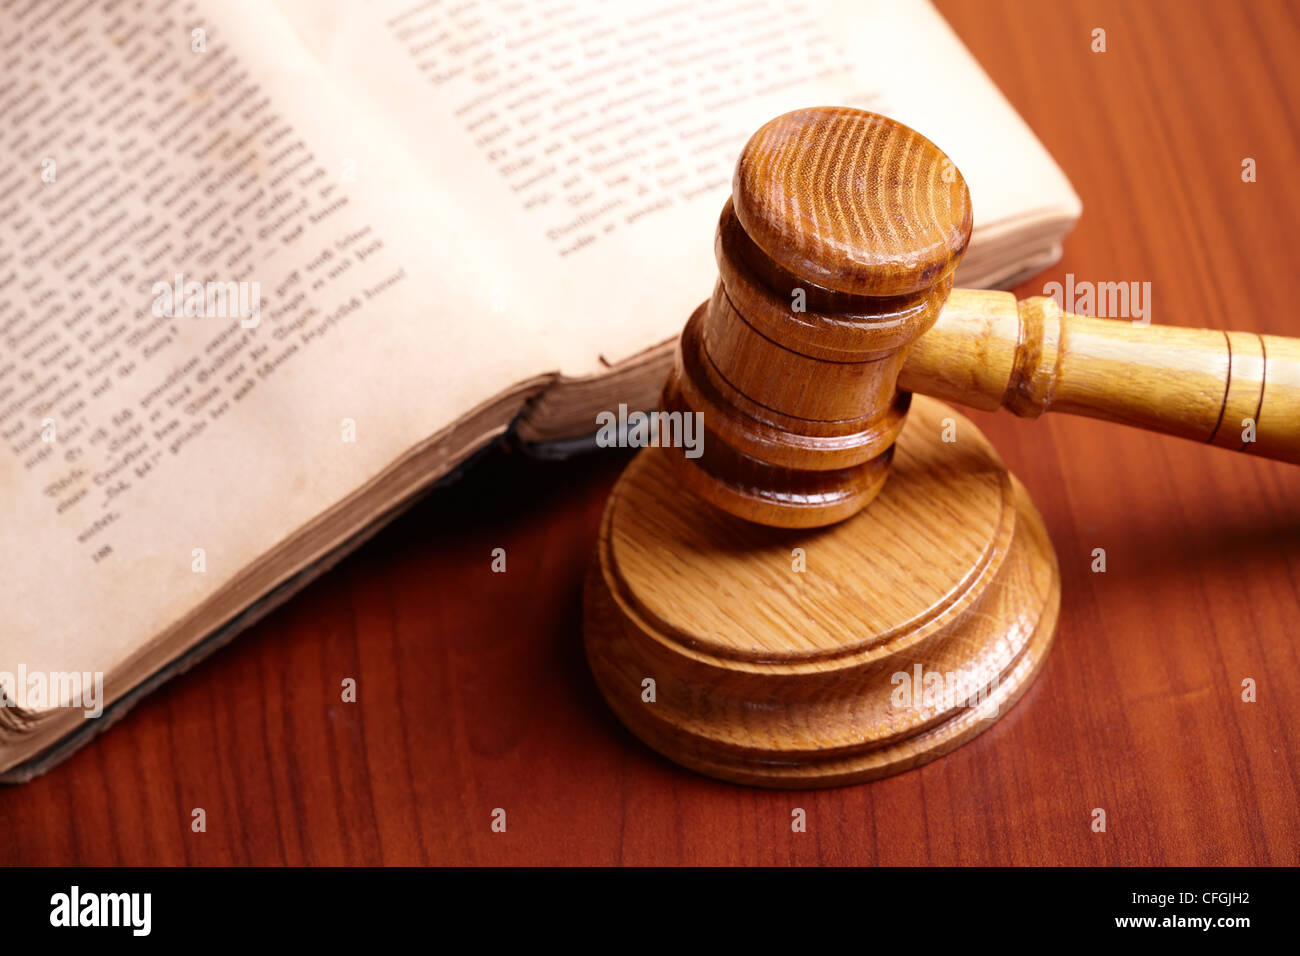 Old book and gavel on wooden desk Stock Photo